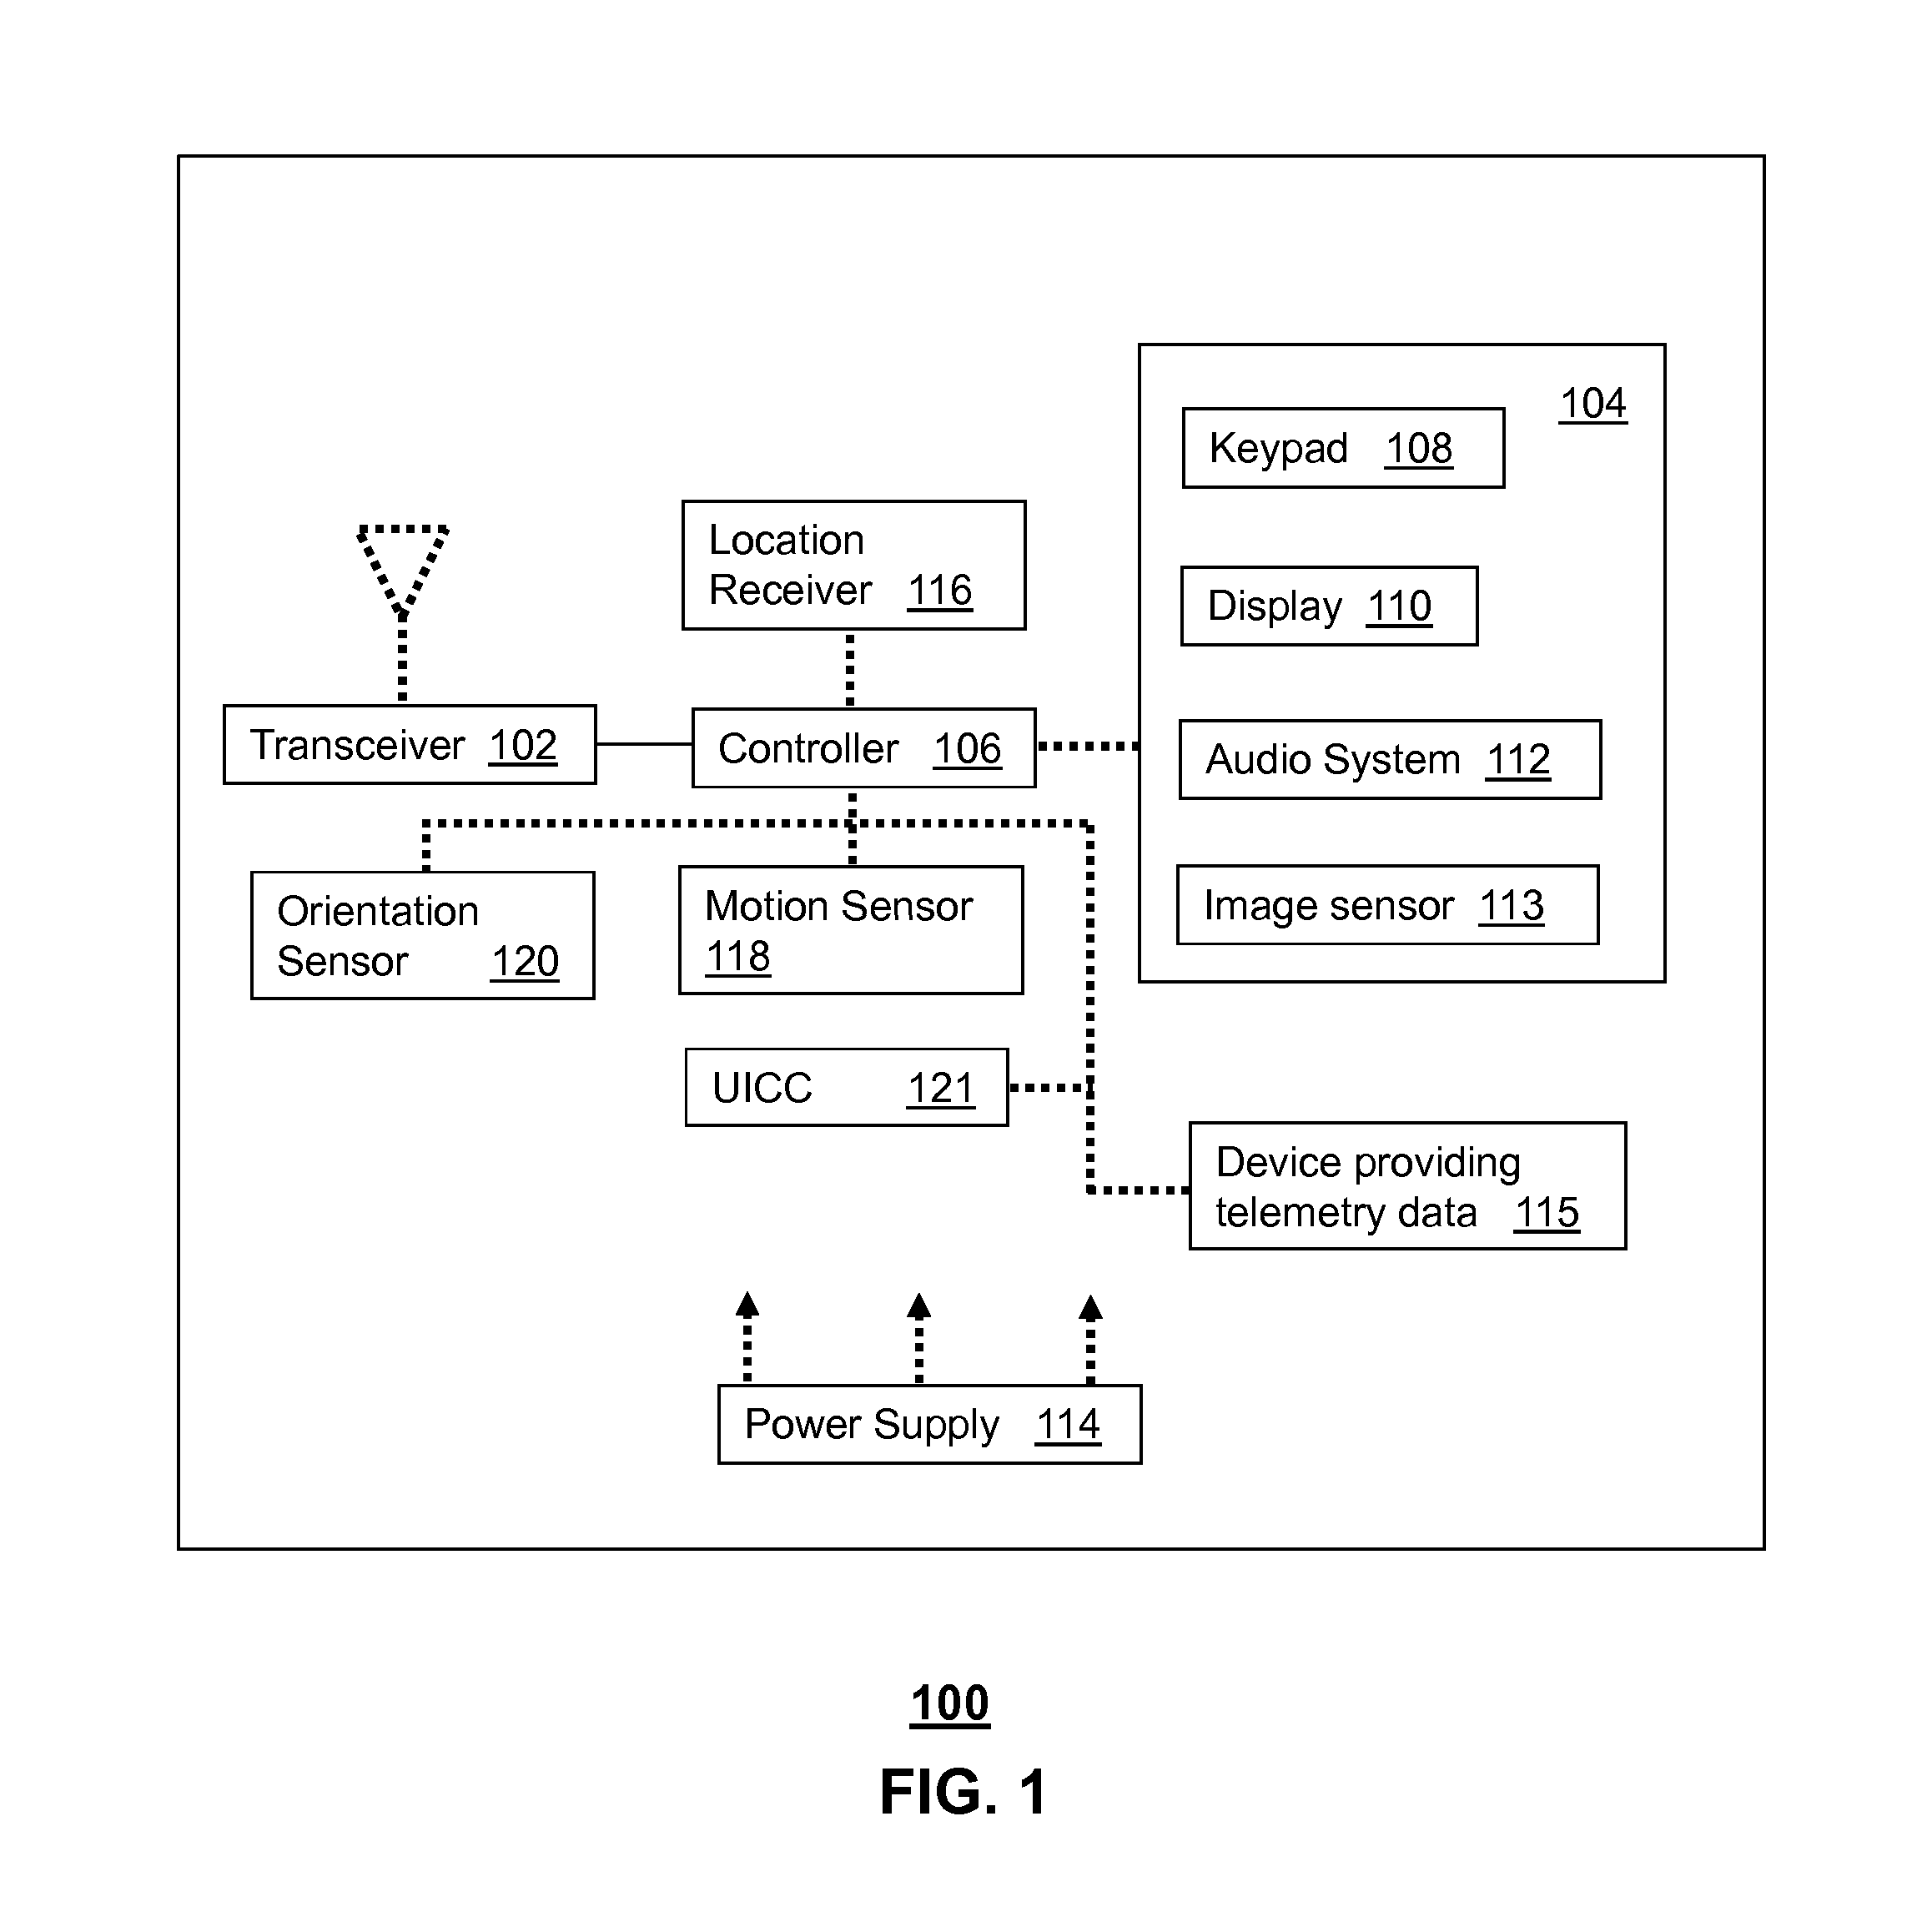 Apparatus and methods for selecting services of mobile network operators